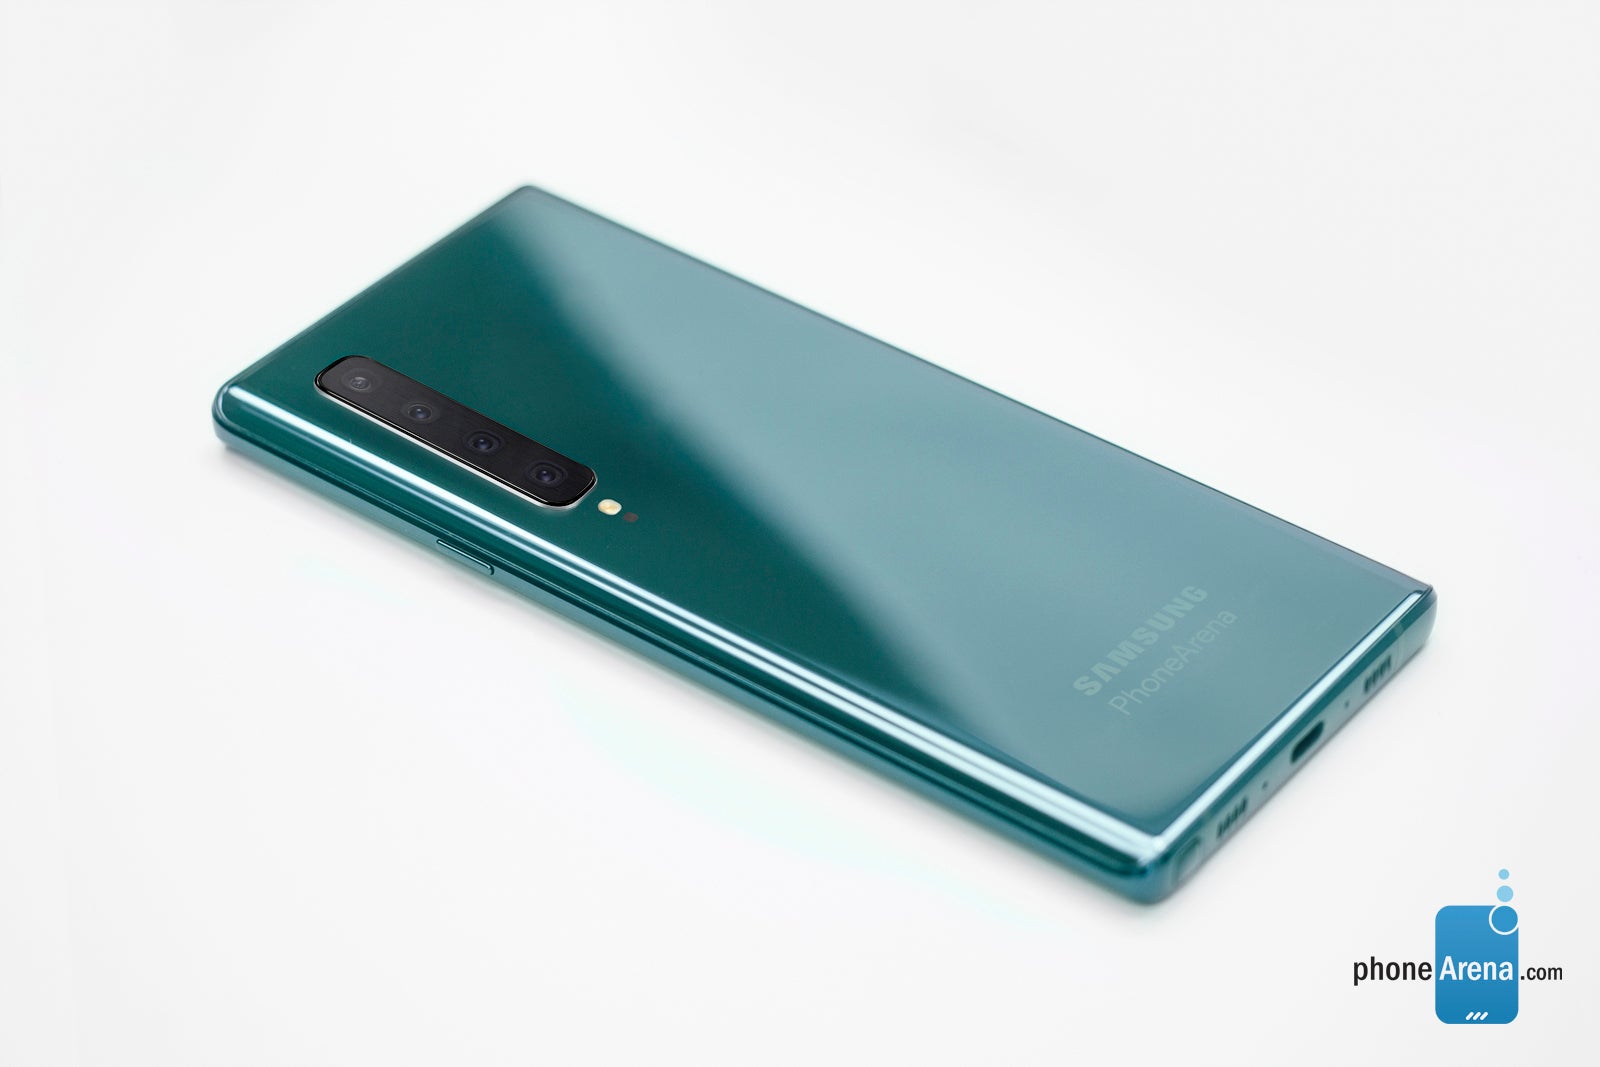 Samsung Galaxy Note 10 concept design, based on available information - Samsung Galaxy Note 10 may introduce a controversial design change